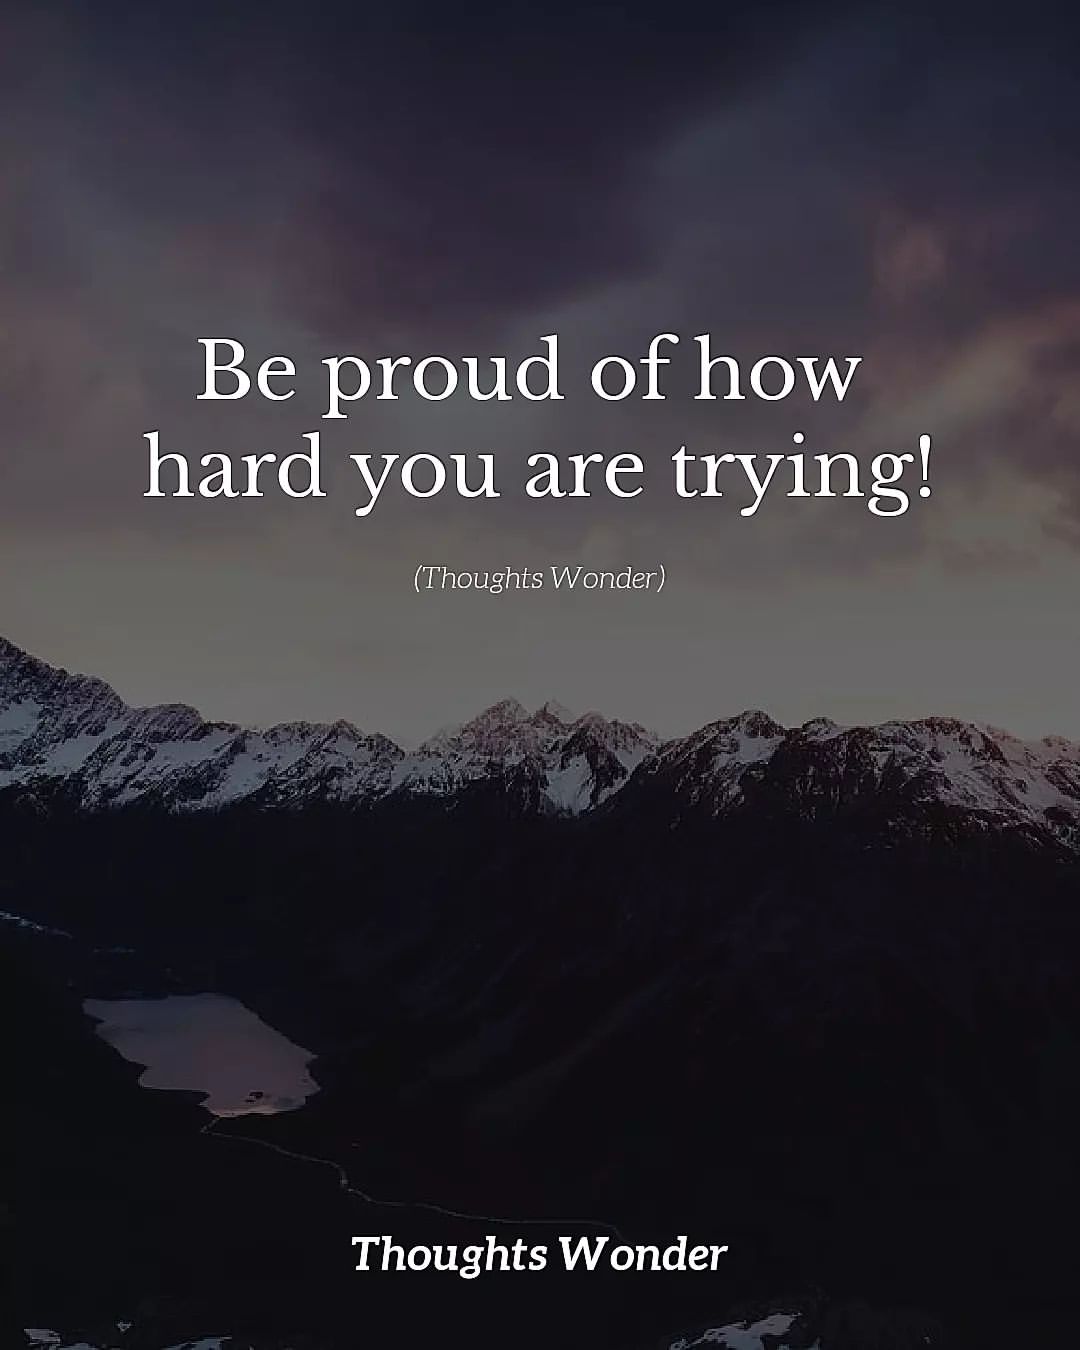 Be proud of how hard you are trying!